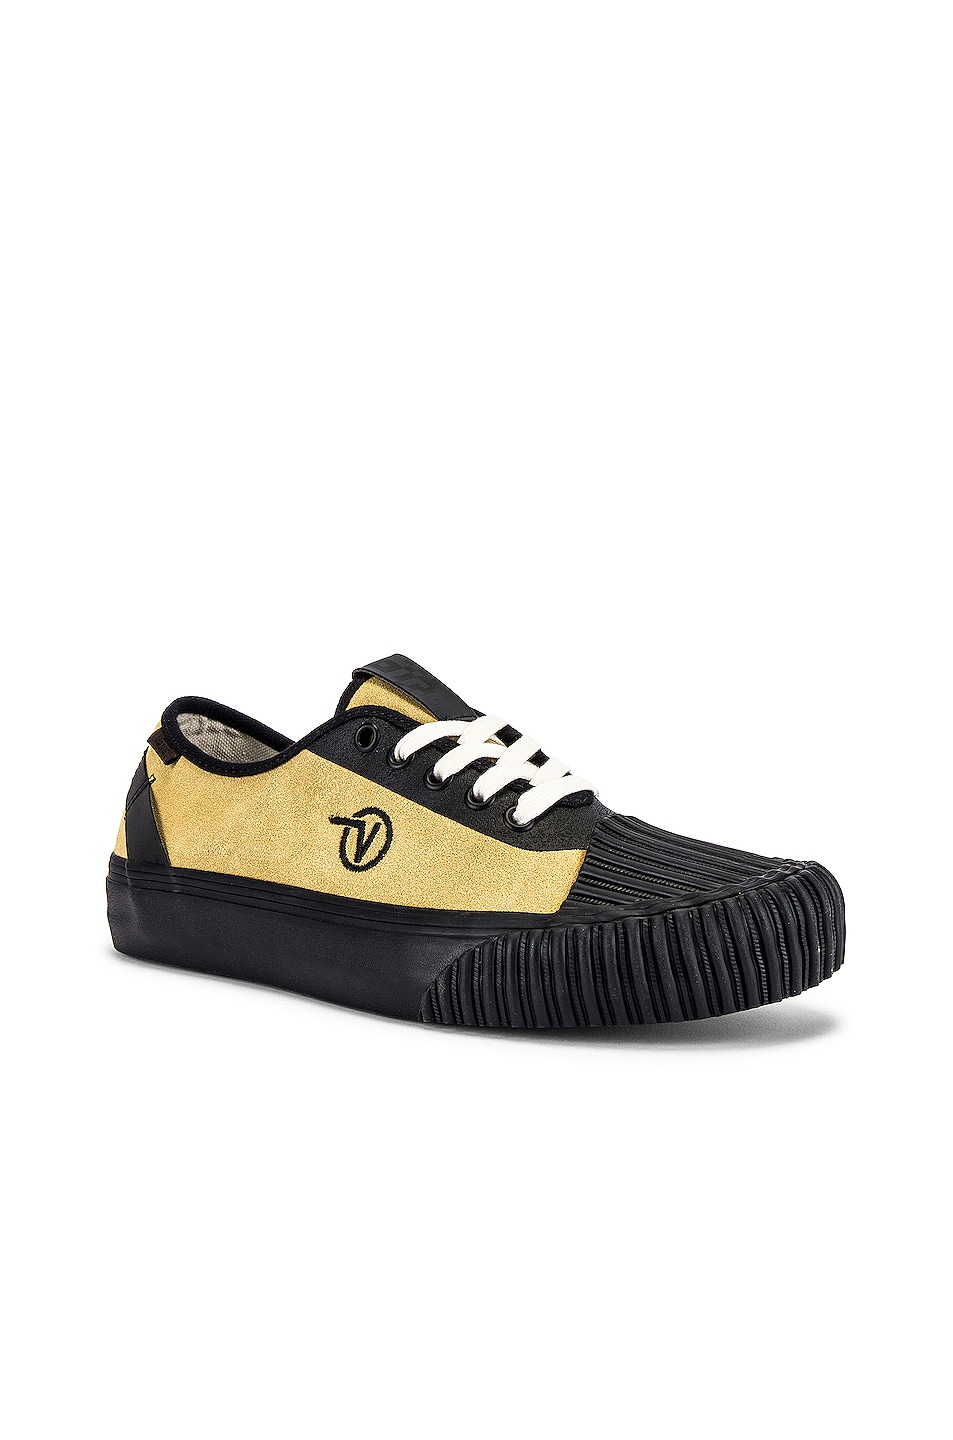 Image 1 of Vans Vault x Taka Hayashi Authentic One Piece LX in Antique Gold & Black